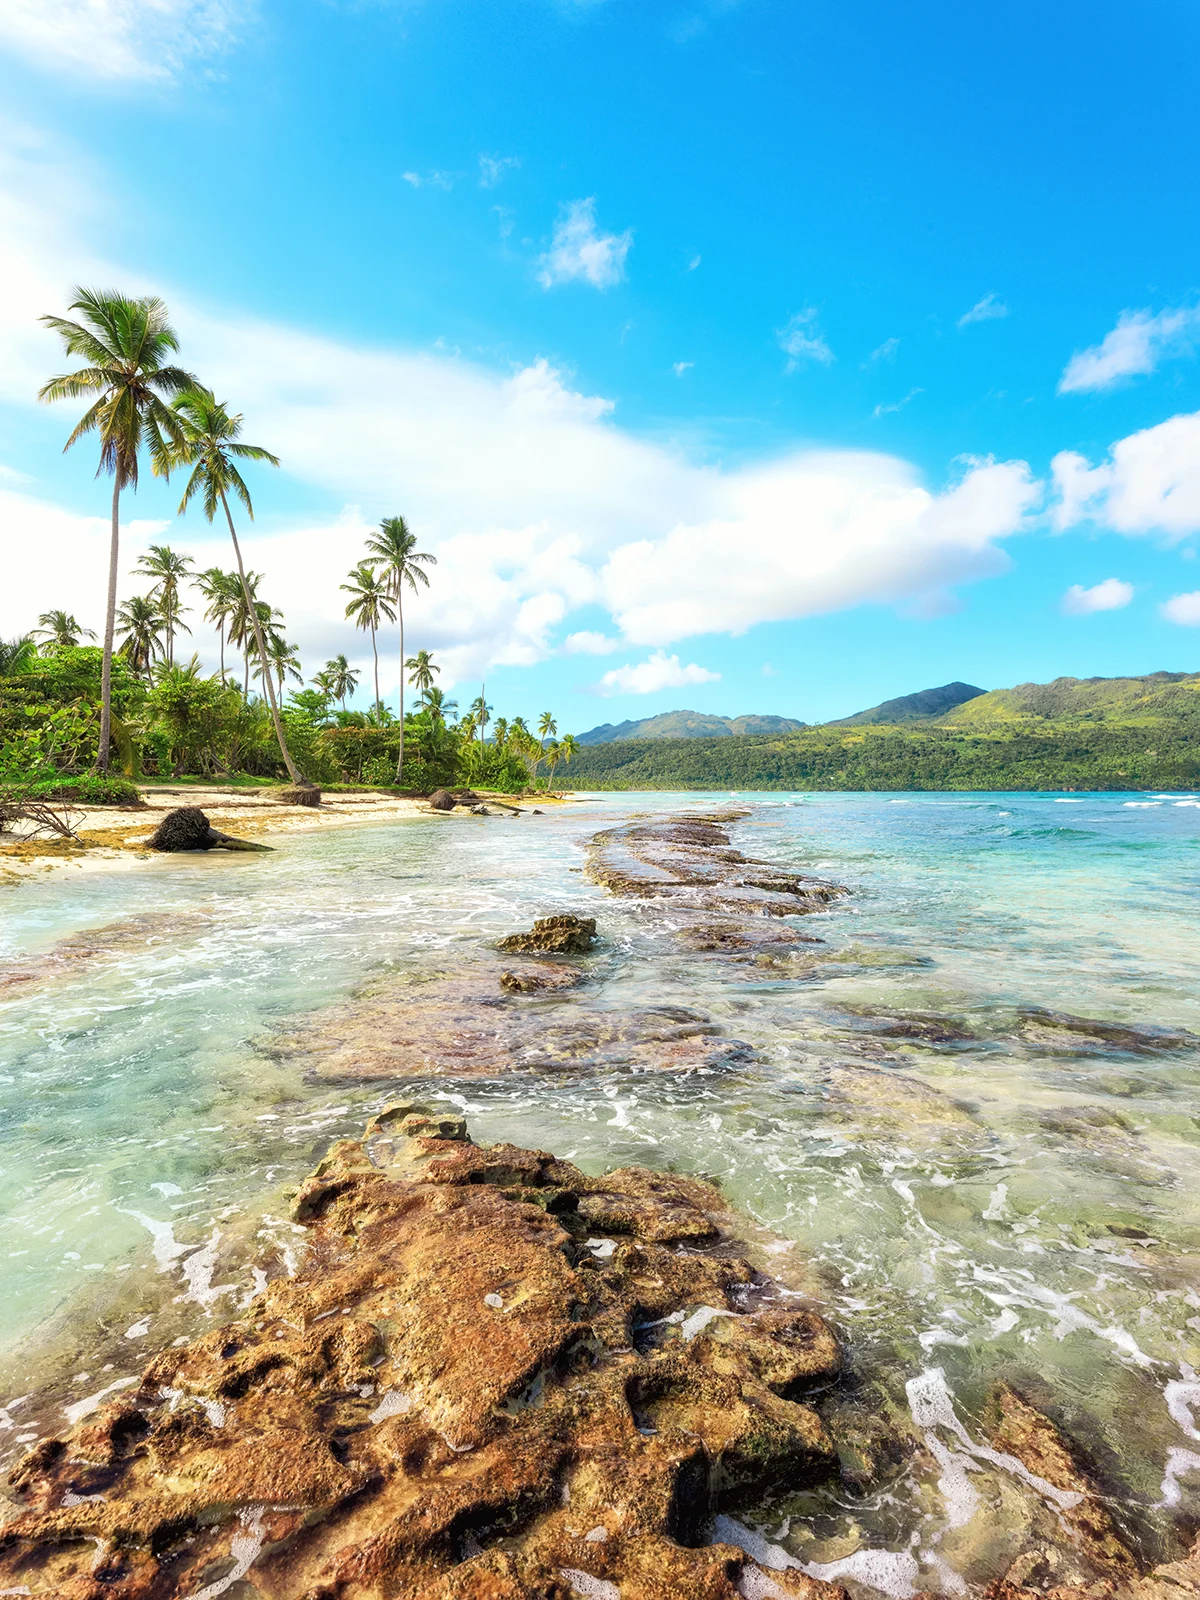 rocky beach with palm trees and beautiful island in distance on sunny day